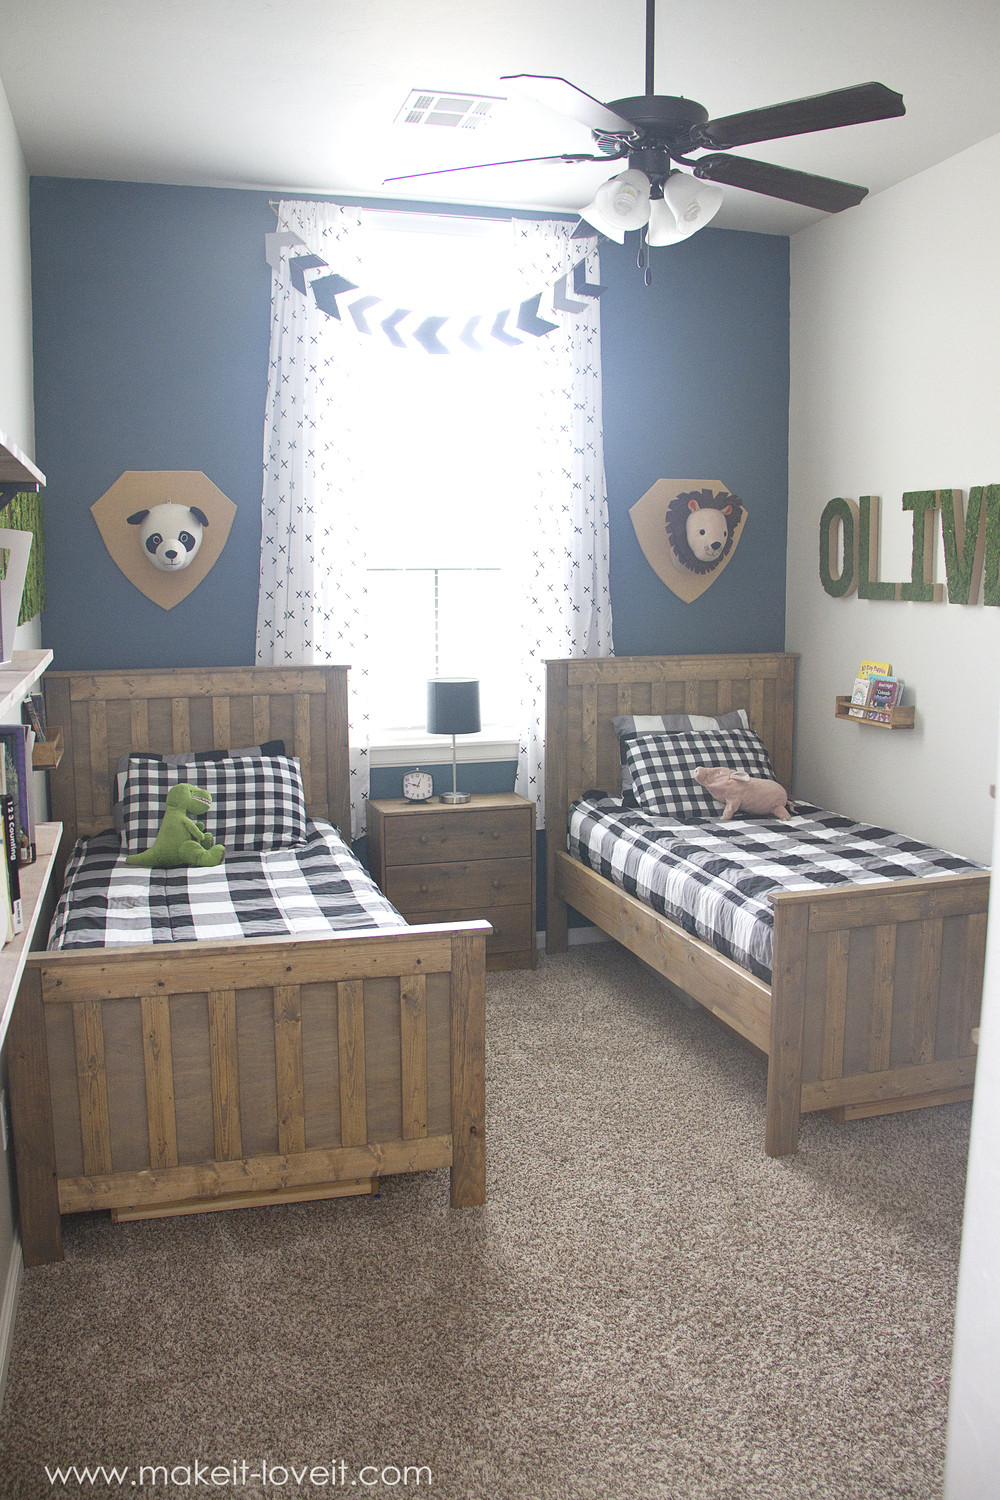 Bedroom For Boy
 Ideas for a d BOYS Bedroom …yay all done